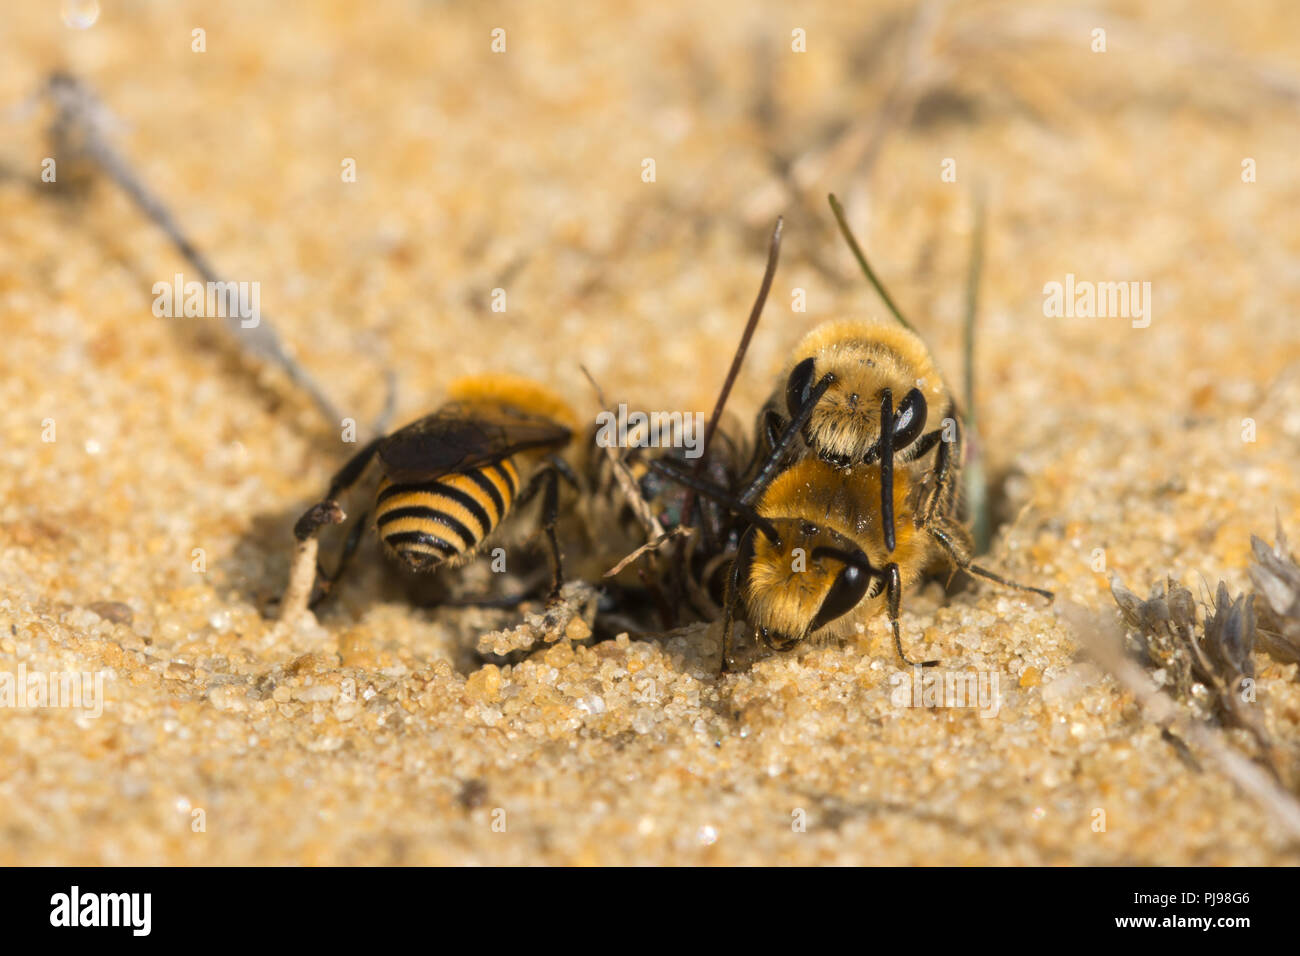 Ivy bees (Colletes hederae), a solitary species of plasterer bee first seen in the British Isles in 2001, in a mating ball on sand in Hampshire, UK Stock Photo